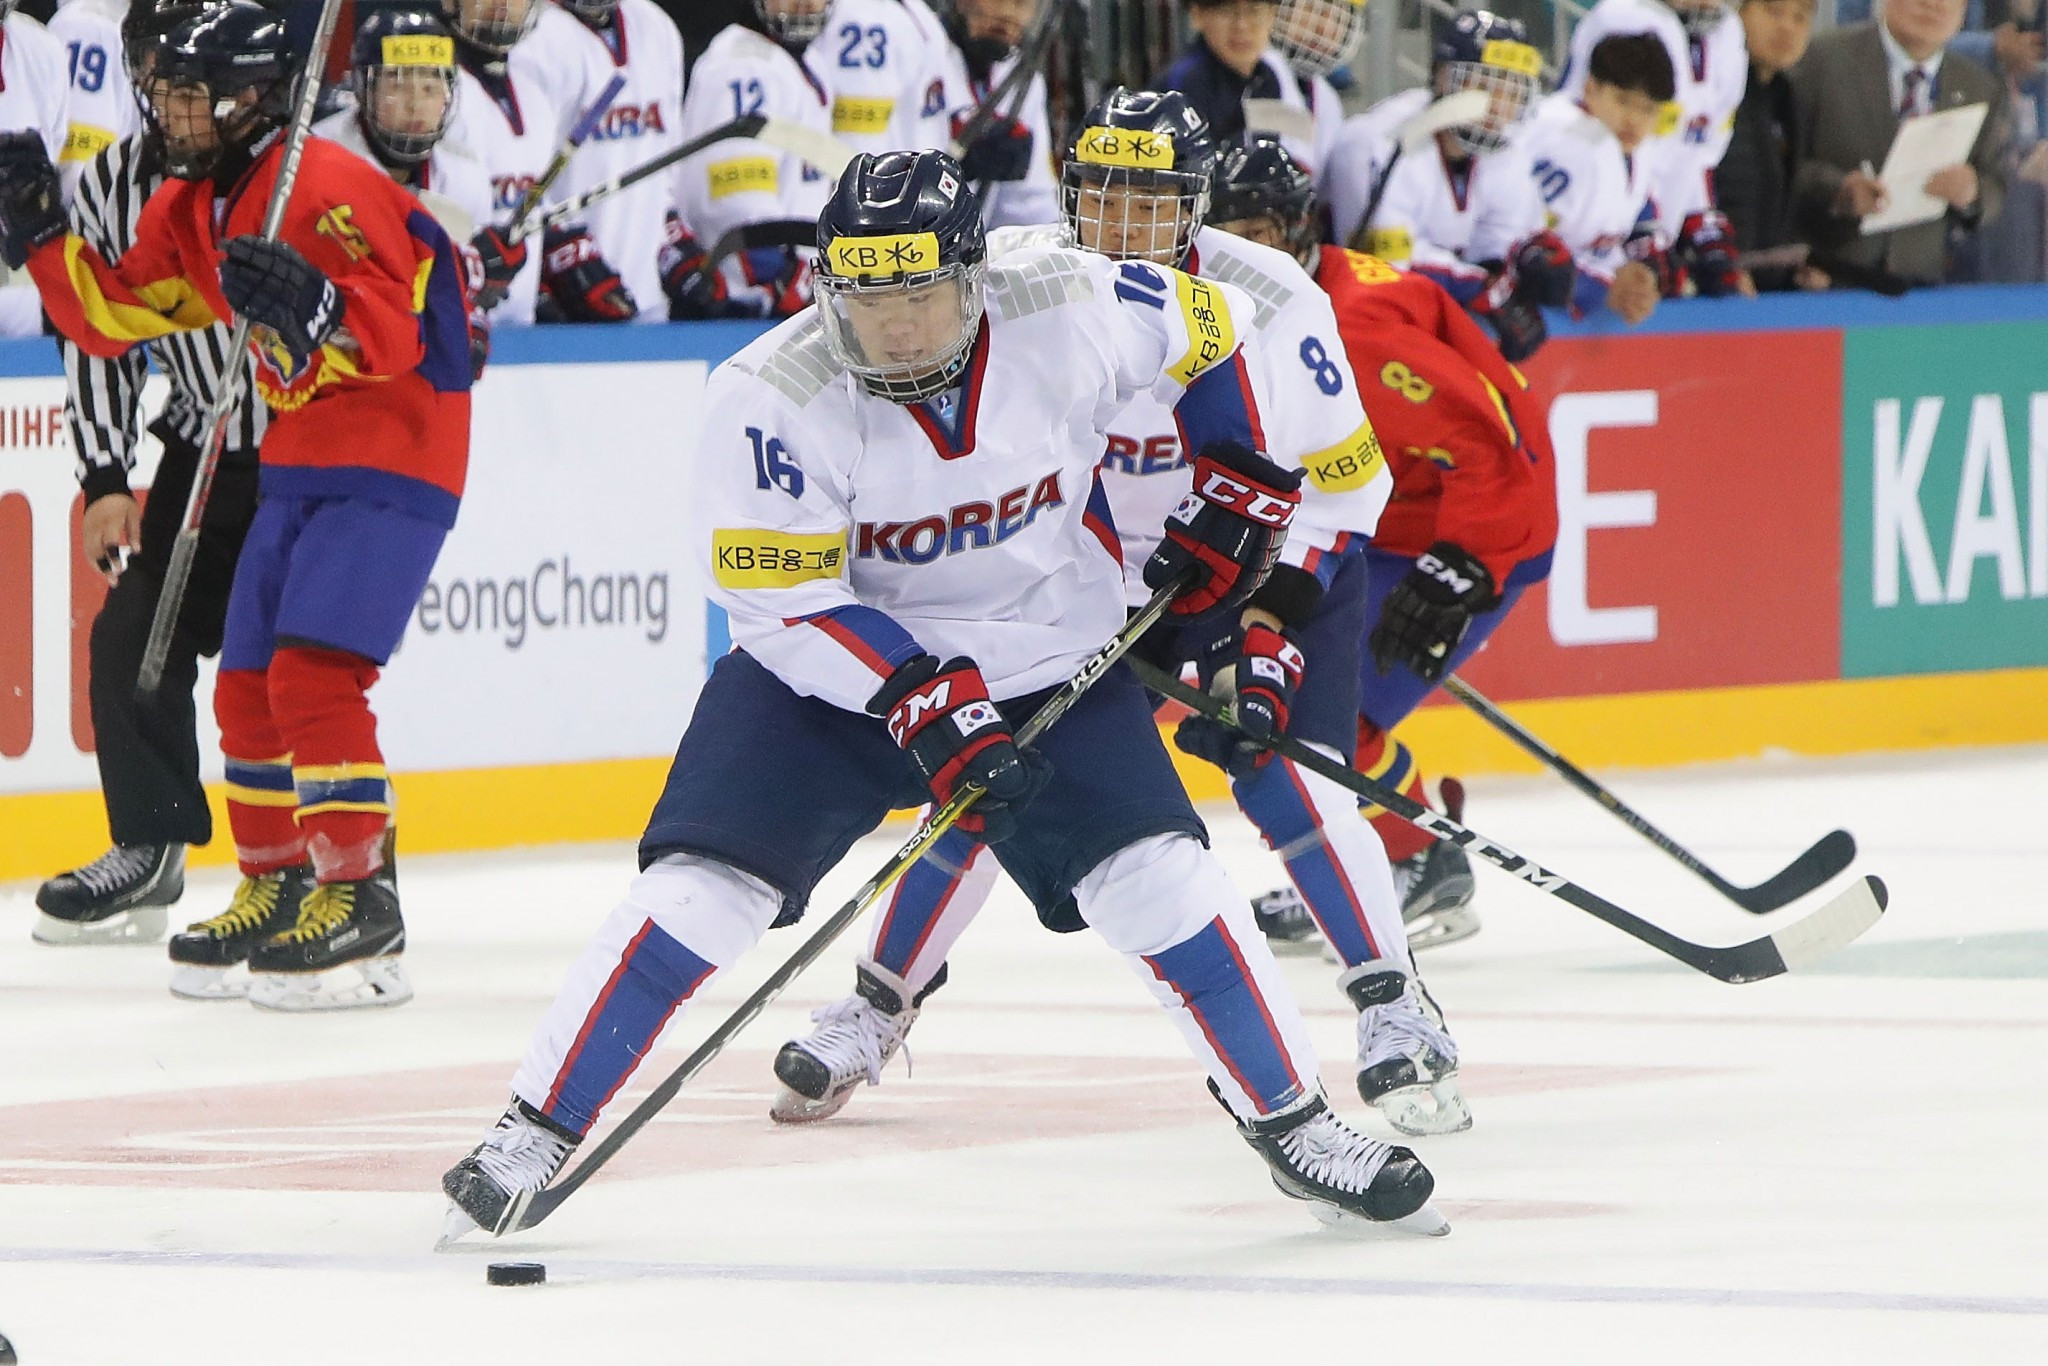 IIHF encouraged South Korea to recruit from overseas, official says